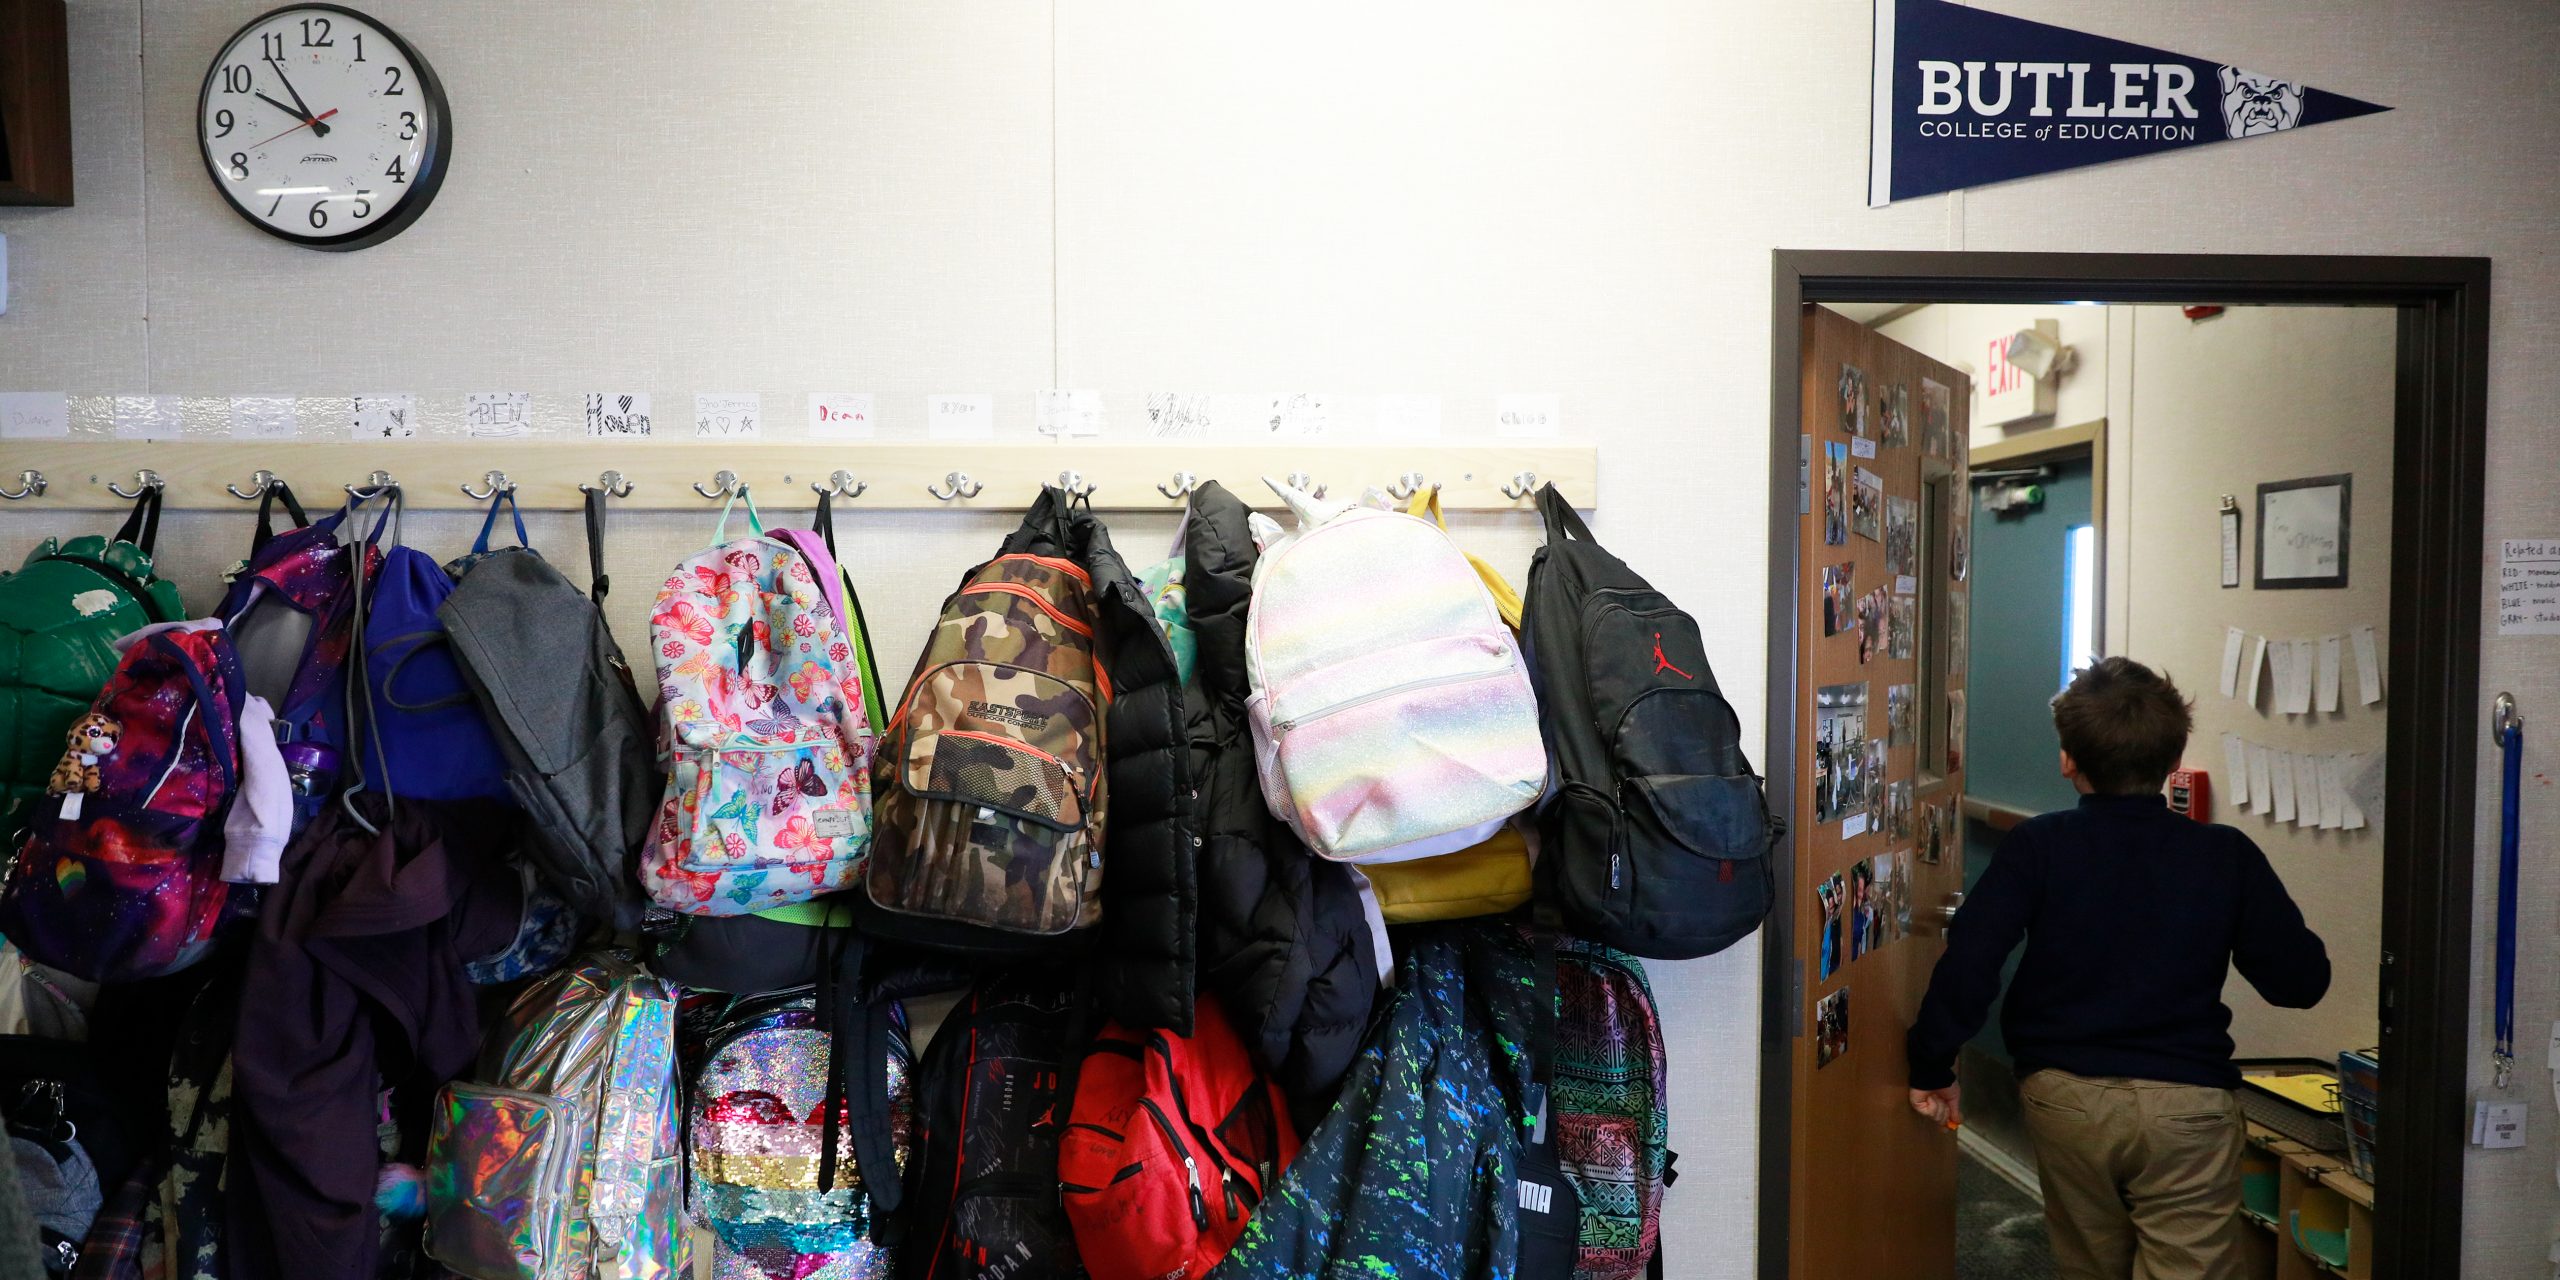 Backpacks at a Butler Lab School